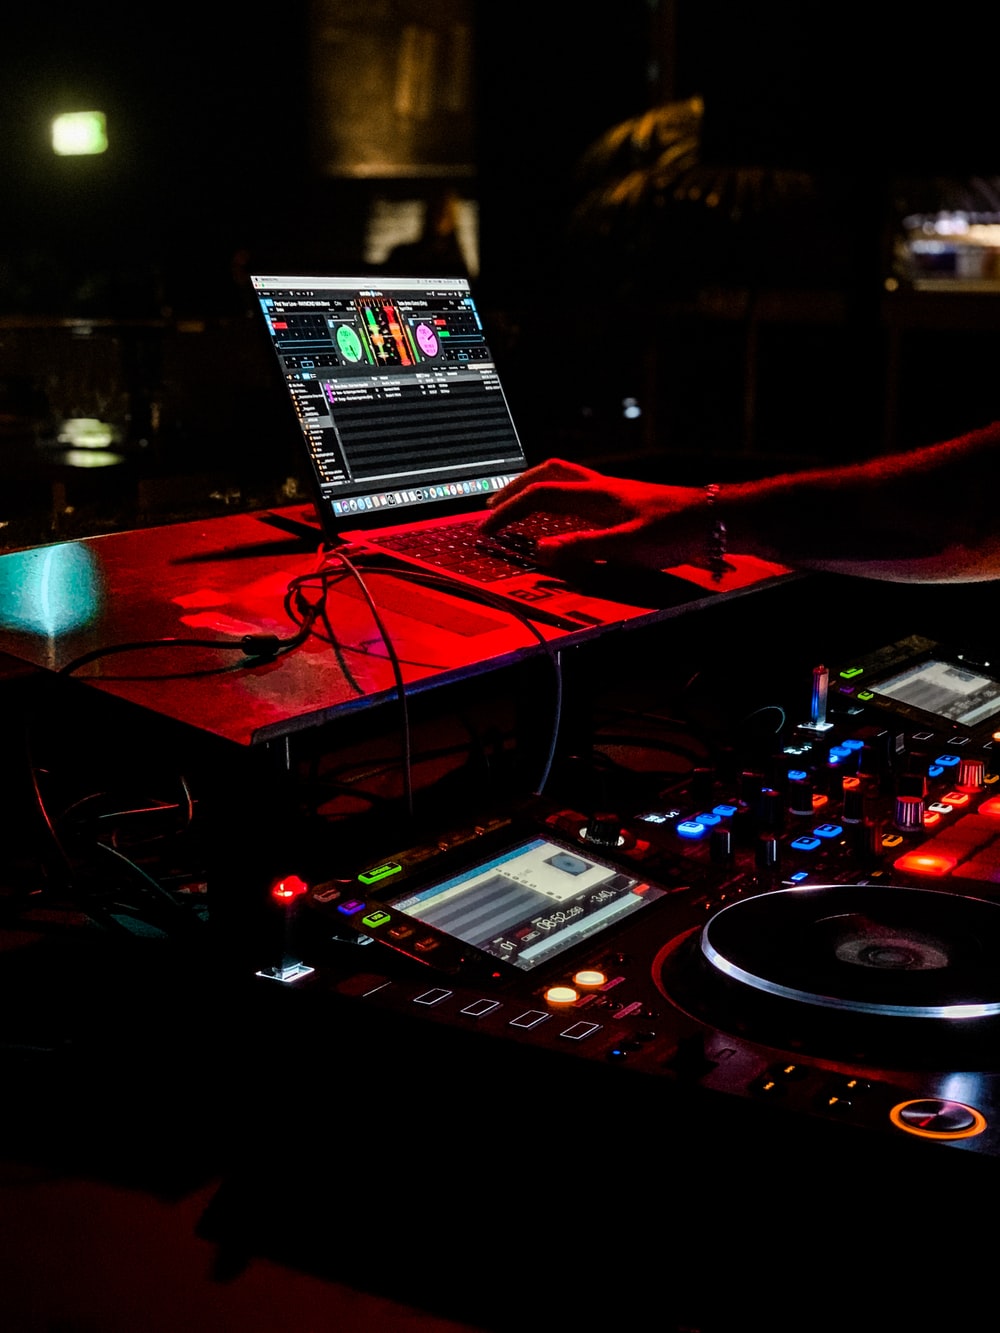 Club Dj Picture. Download Free Image